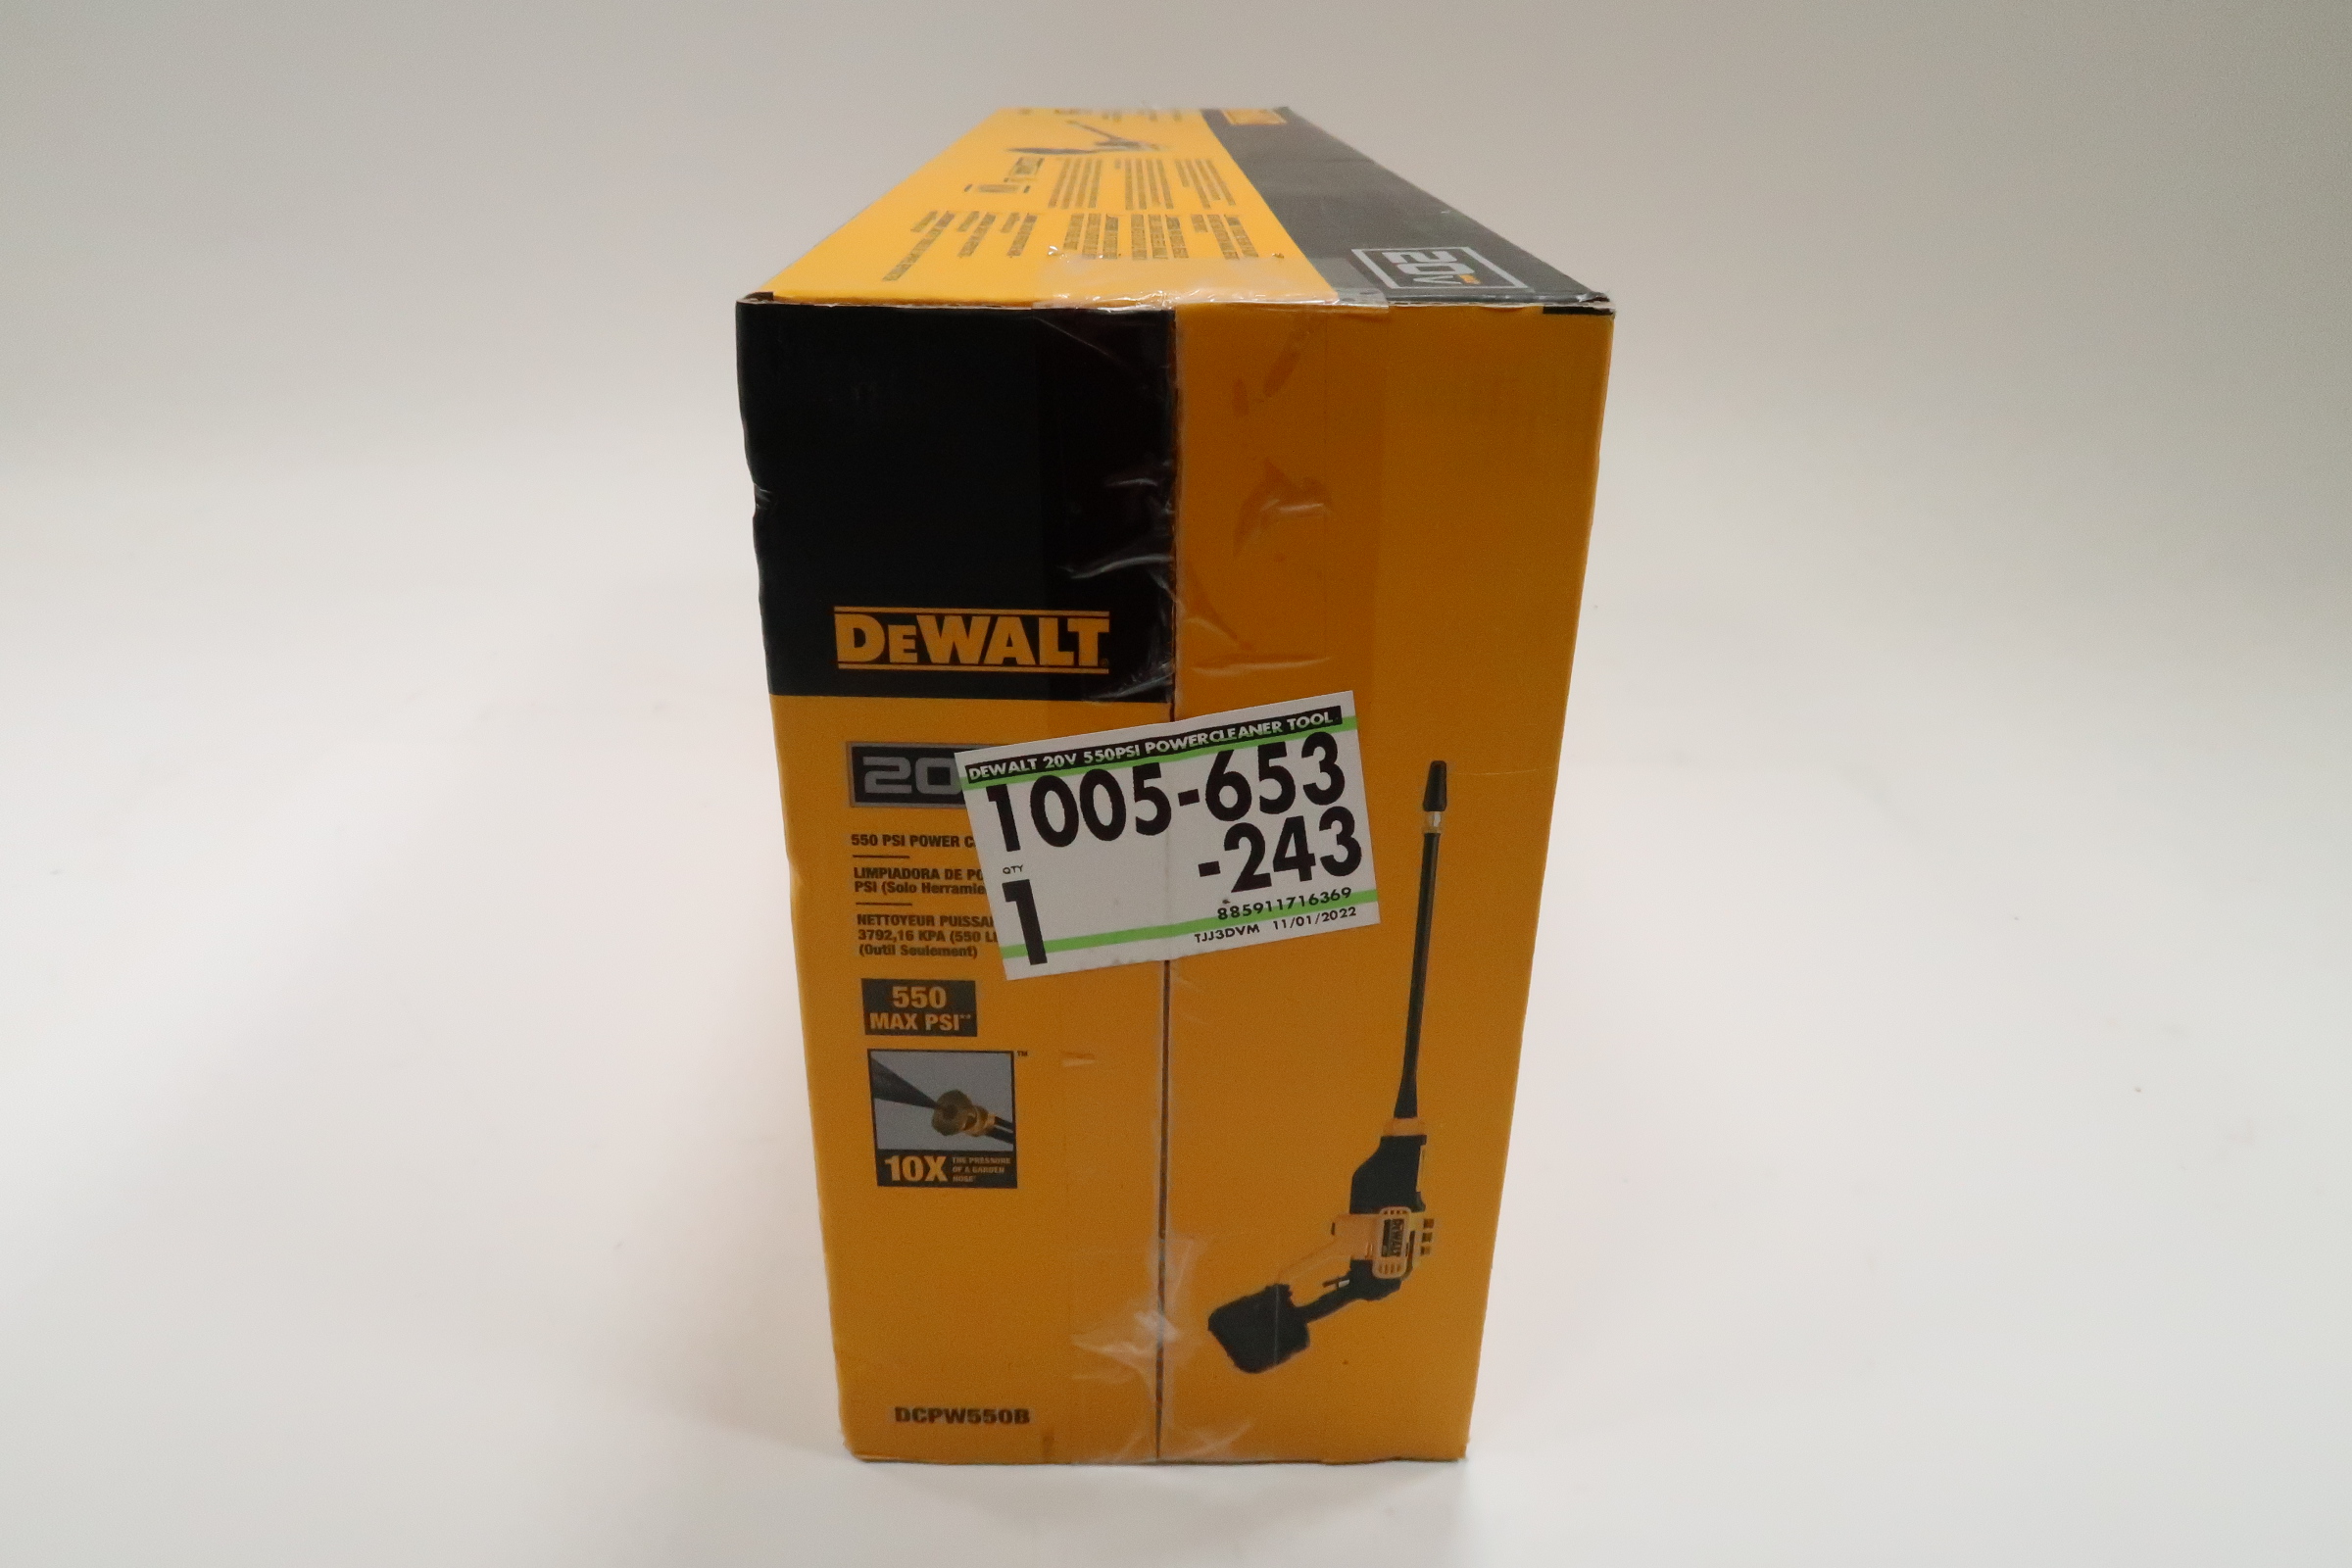 DEWALT DCPW550B 20V MAX Cordless 550 psi Power Cleaner (Tool Only) New  885911716369